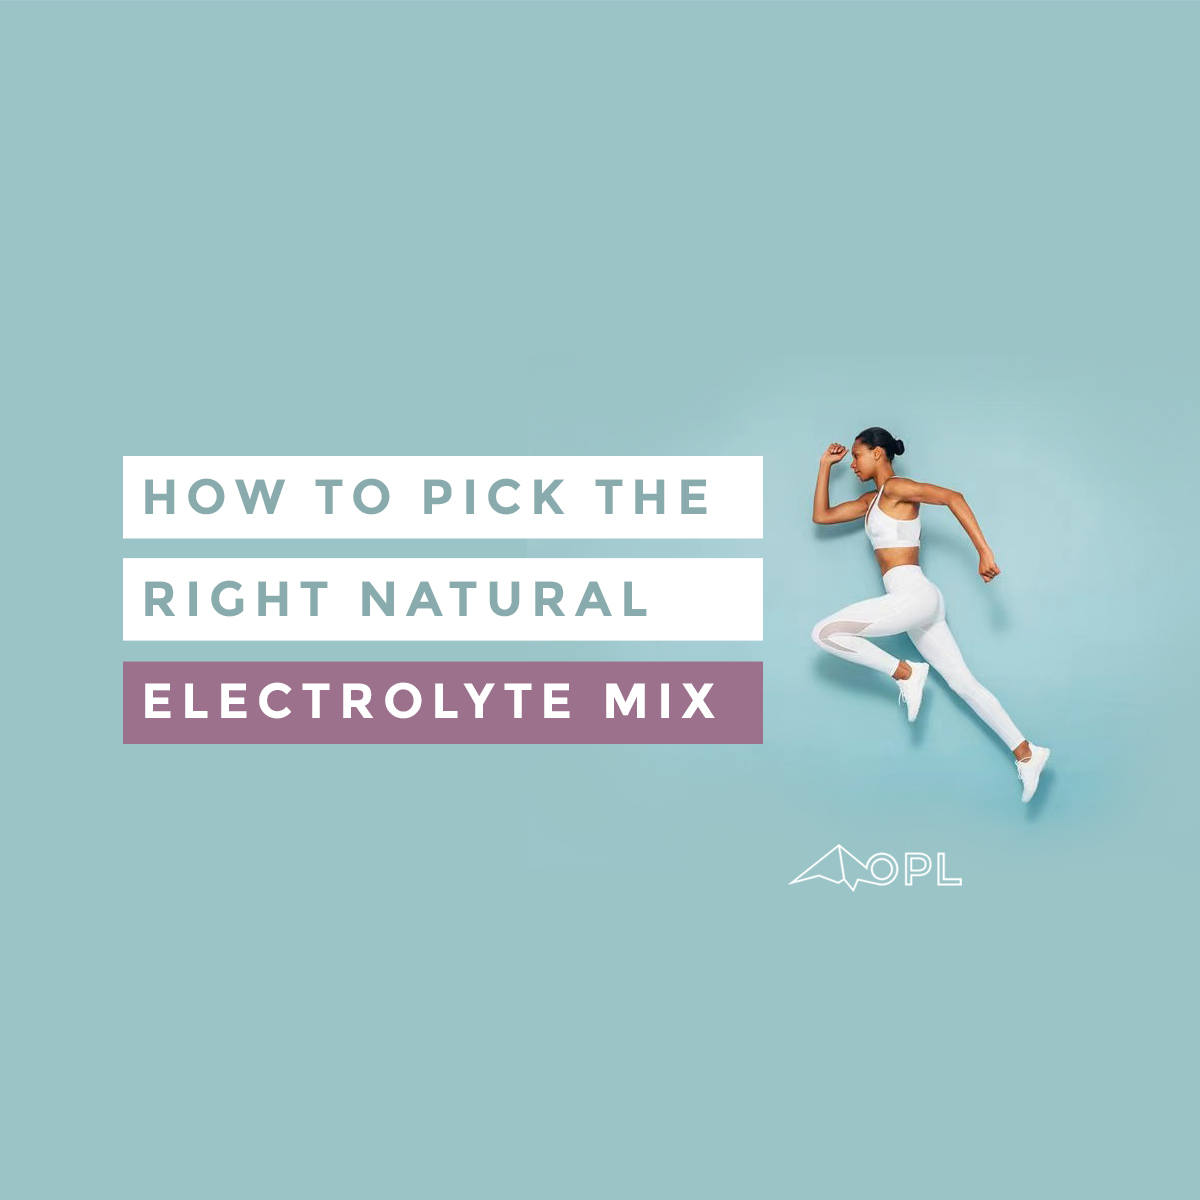 How to pick the right electrolyte mix